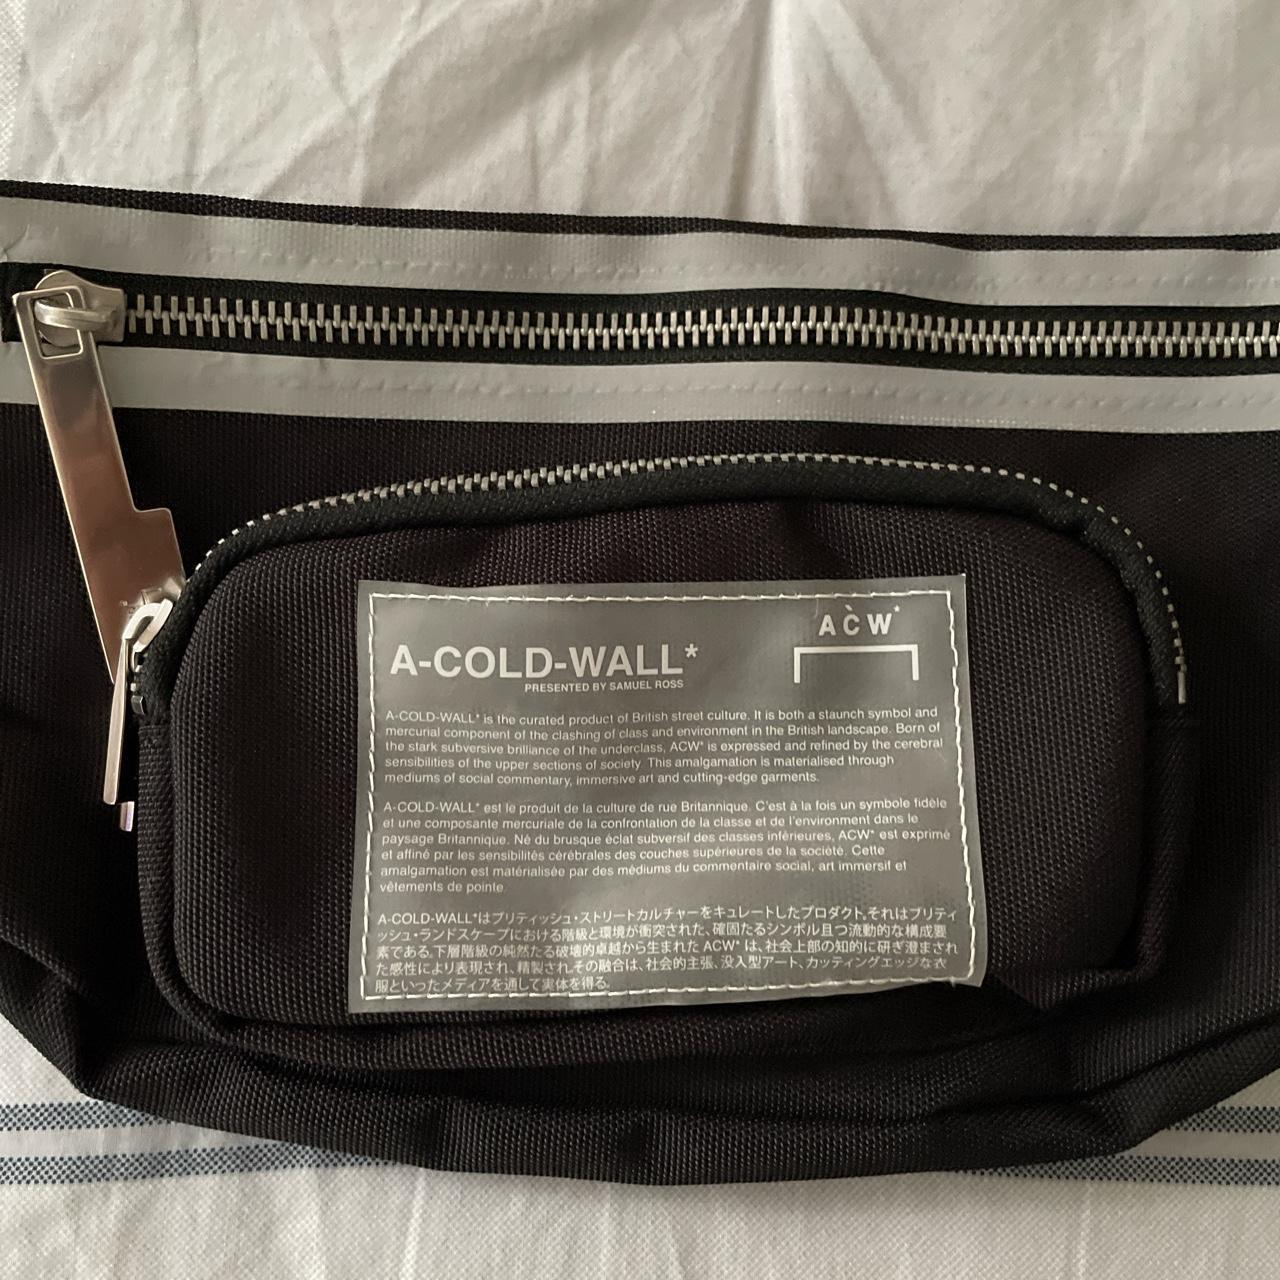 A-COLD-WALL Men's Black and White Bag (2)